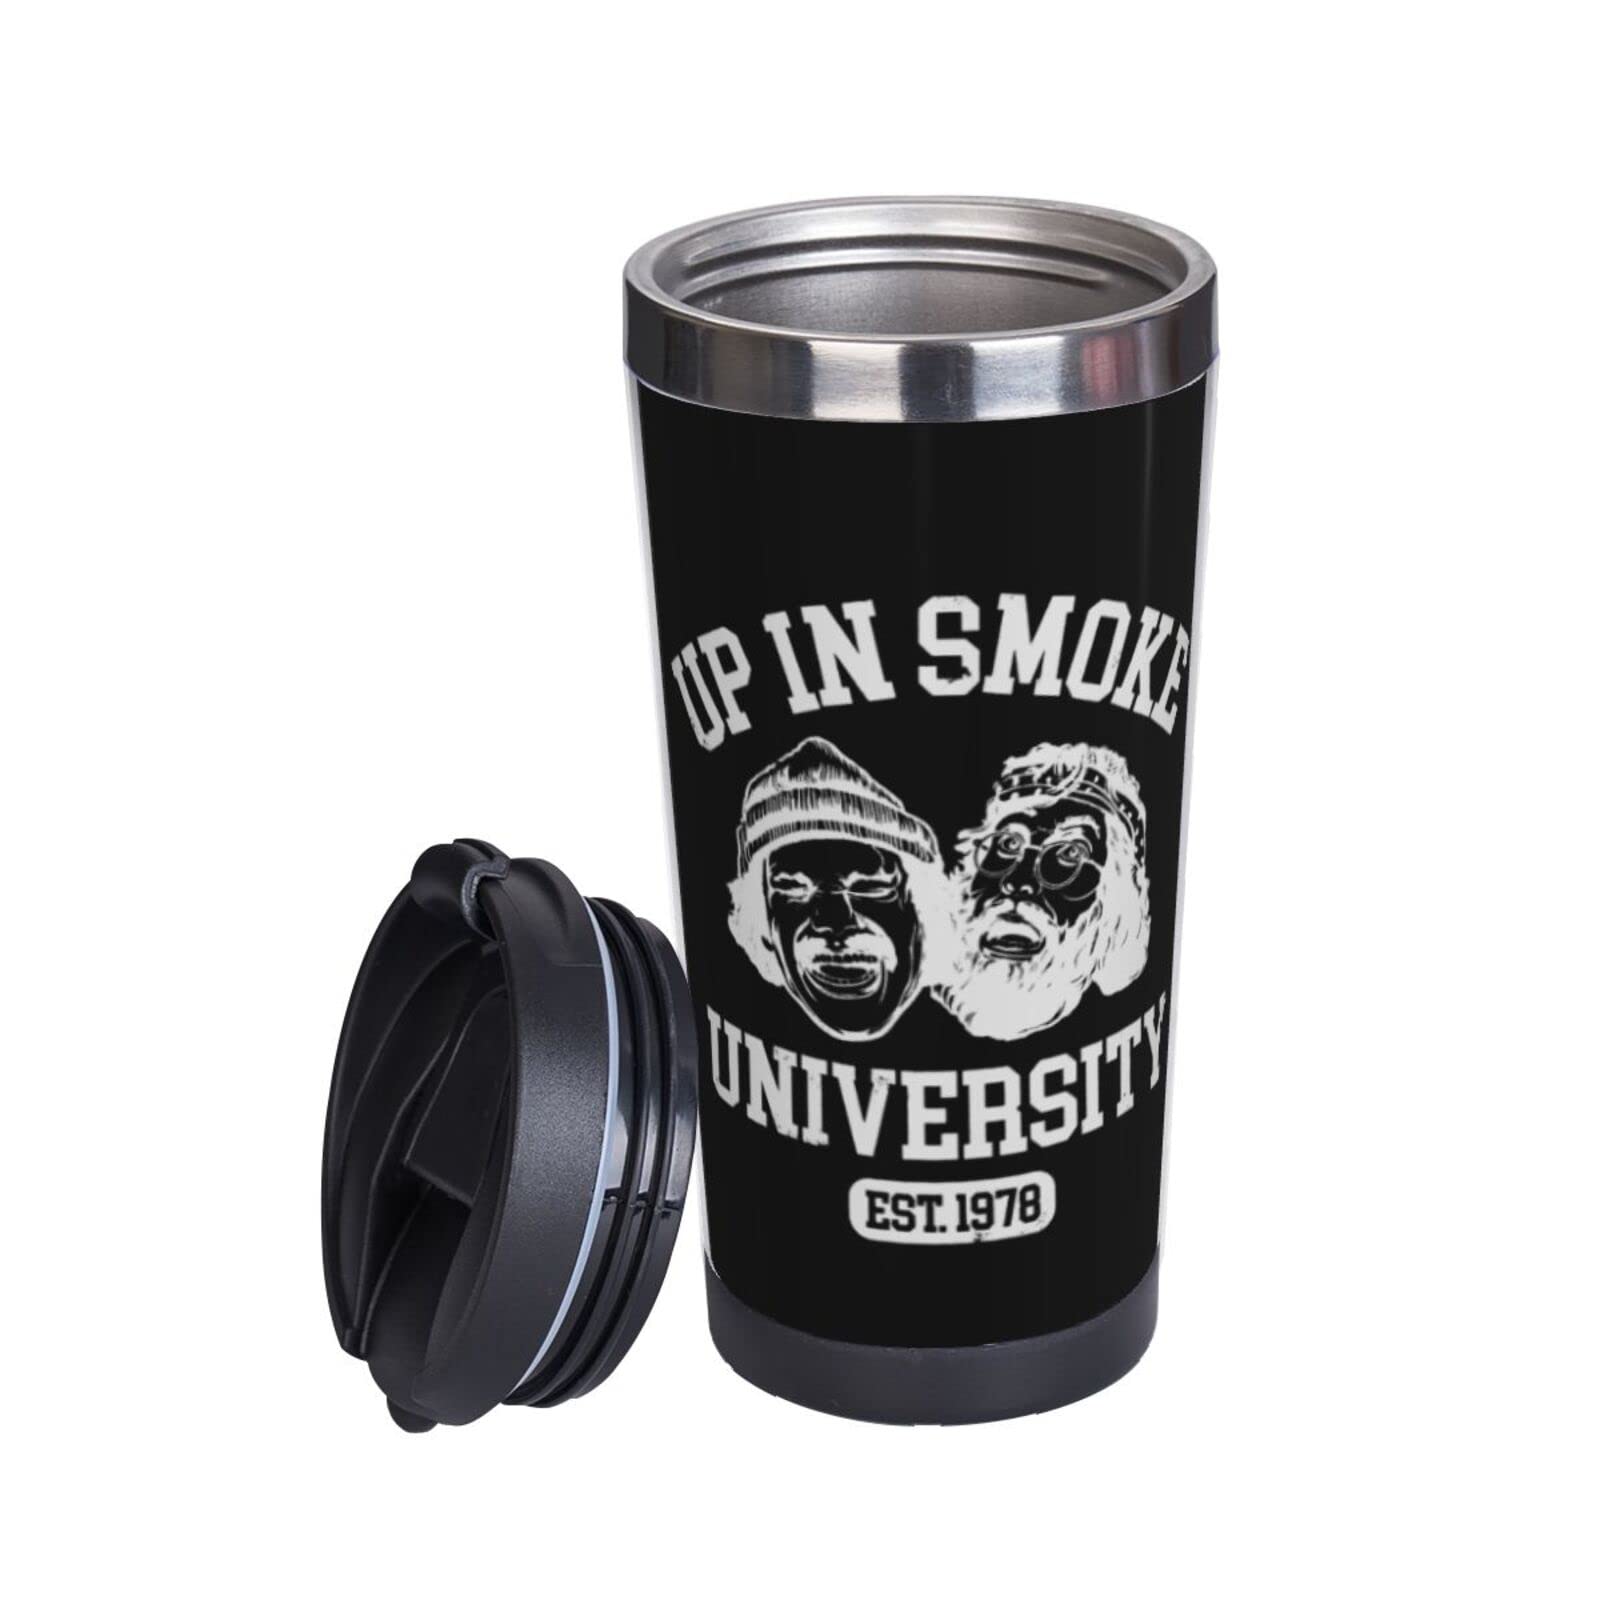 Cheech and Chong University 13 oz Stainless Steel Coffee Cup Suitable for Home, Office, Travel, Party